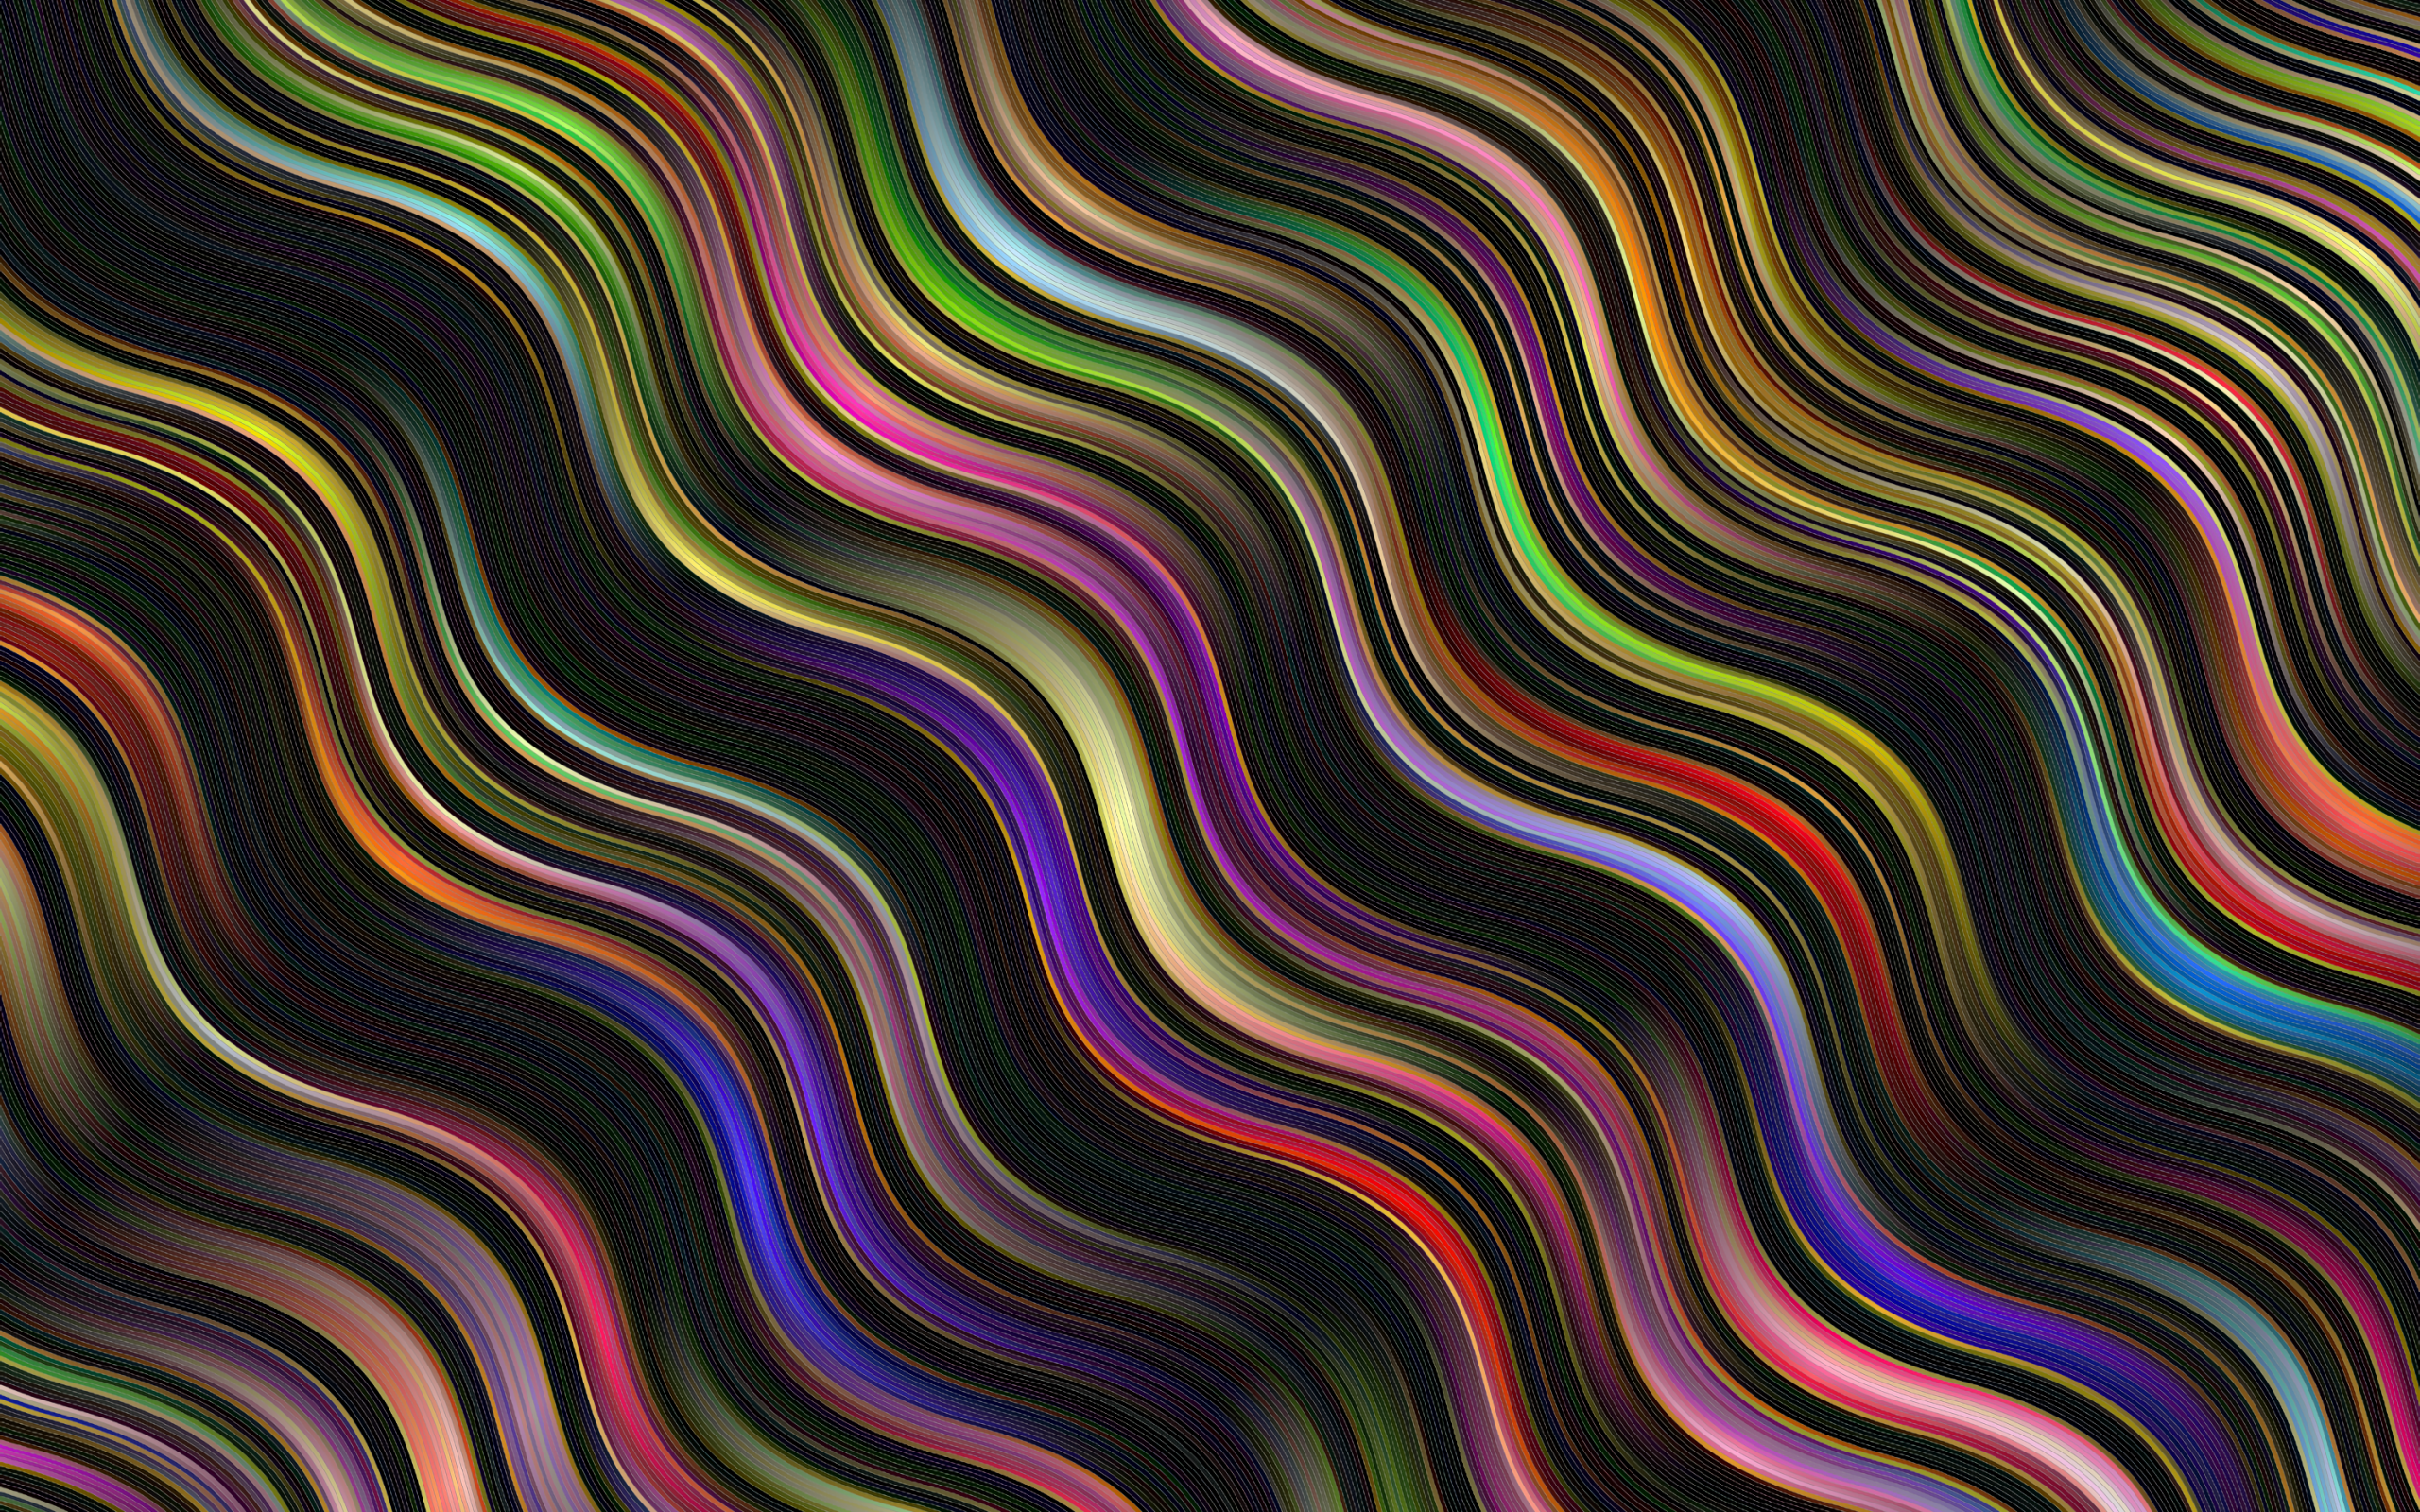 Wavy Illusion, Colorful Lines - HD Wallpaper 